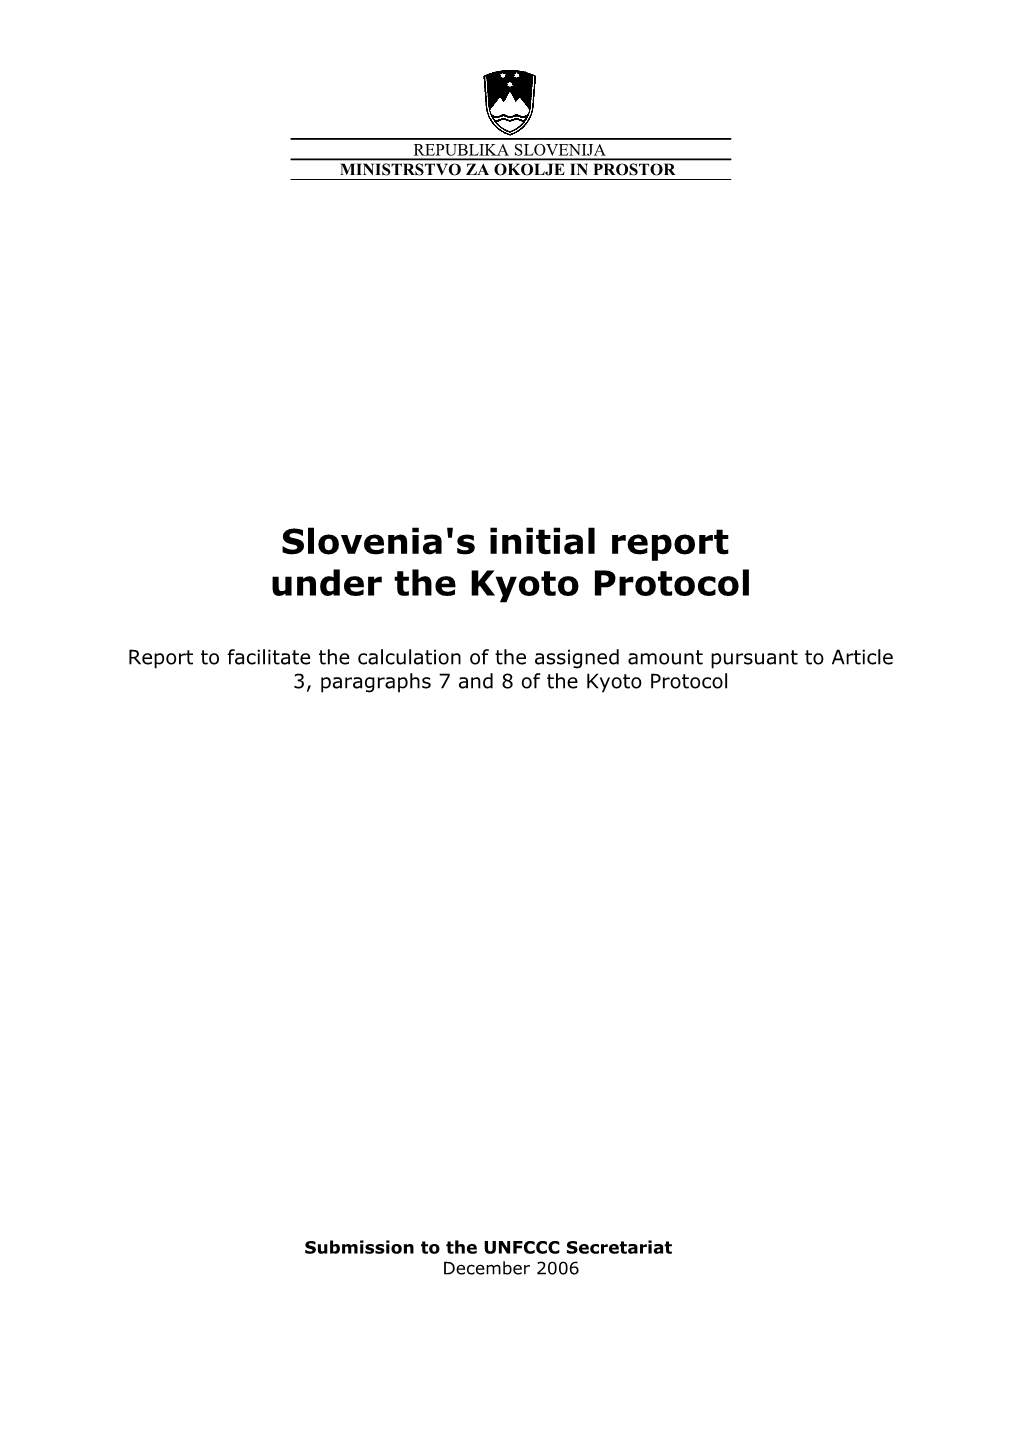 Report to Facilitate the Estimation of Slovenia's Assigned Amount Under the Kyoto Protocol